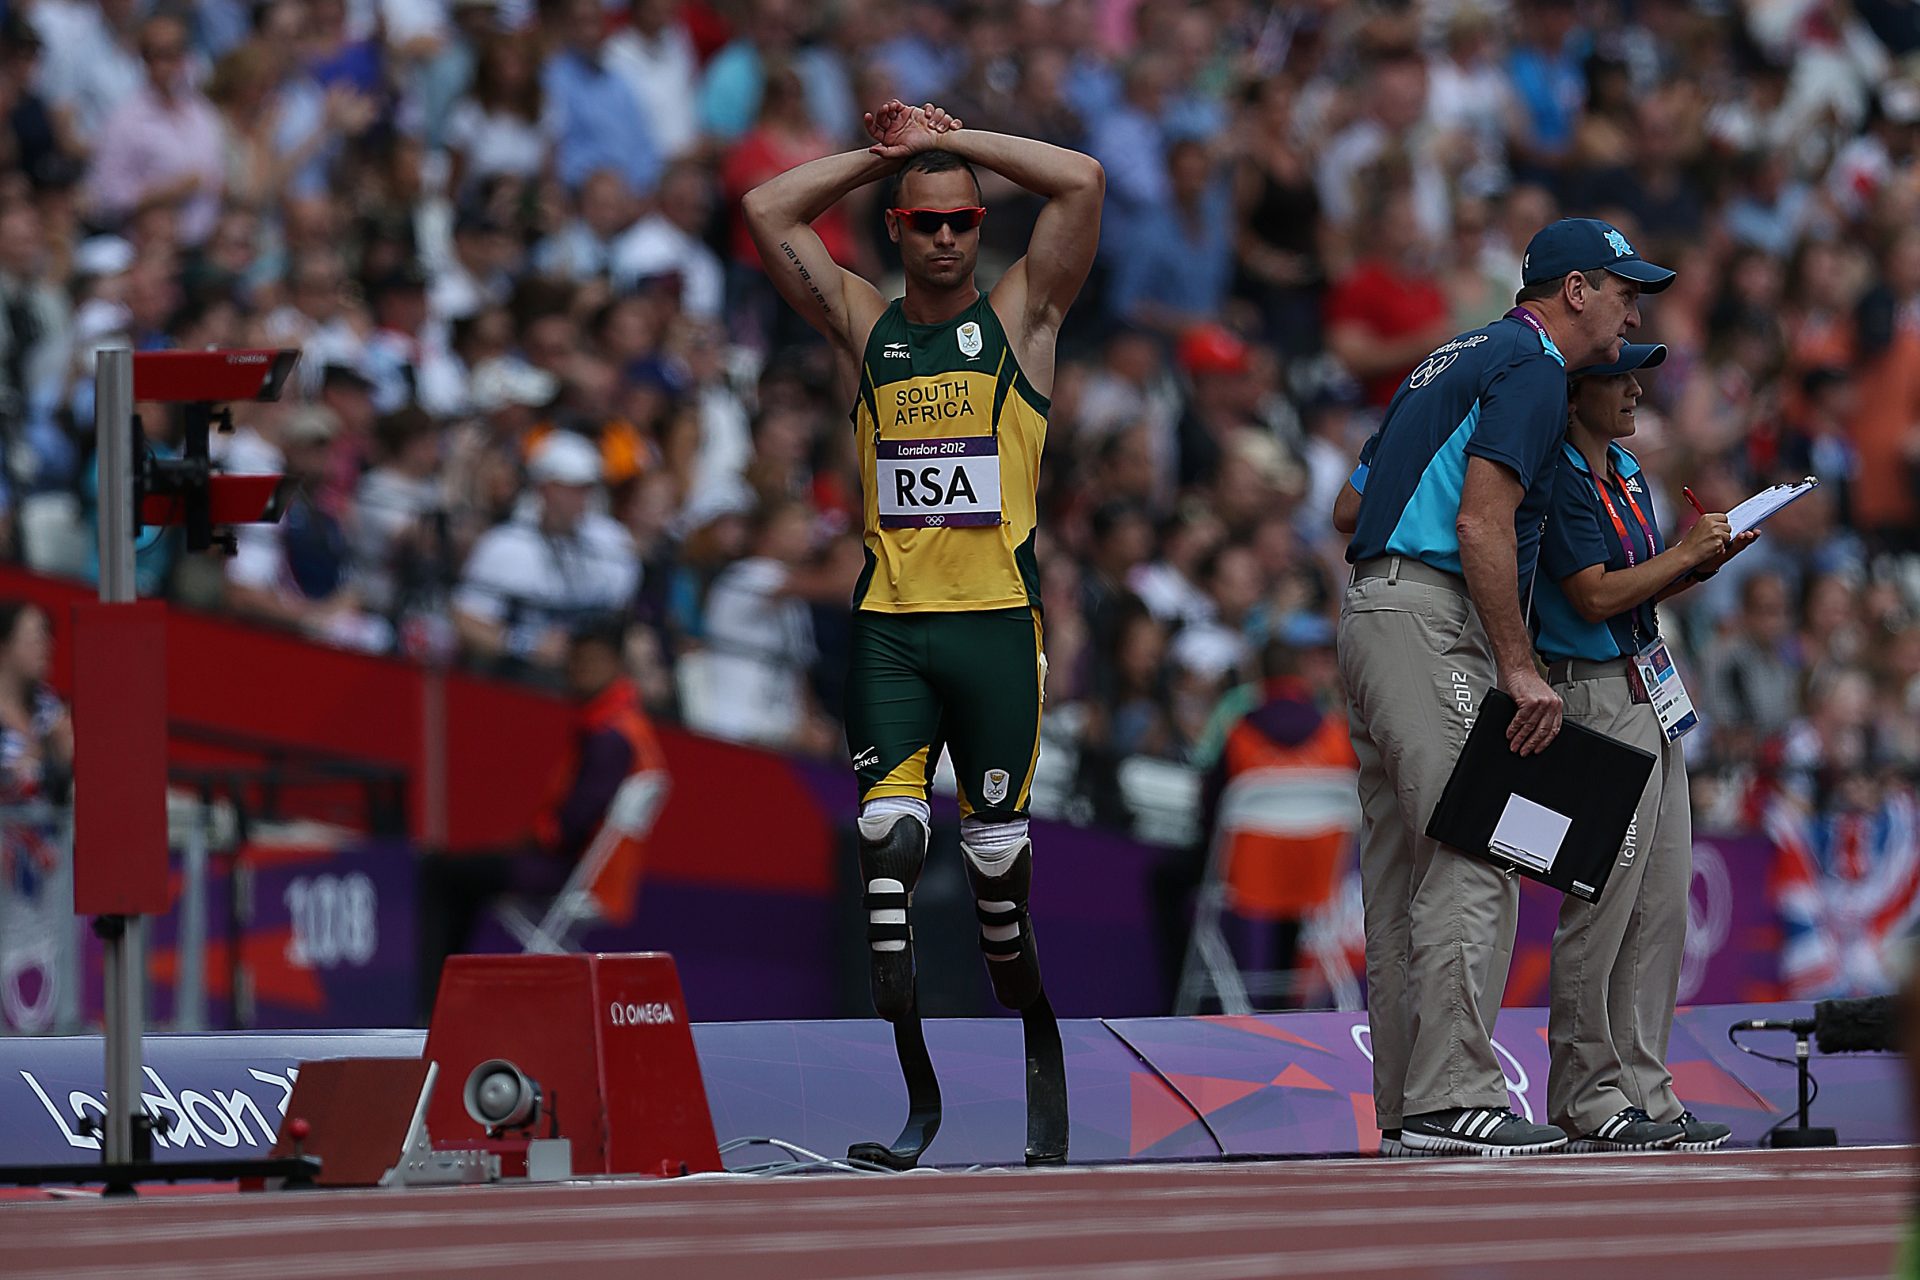 Oscar Pistorius competes at the Olympics